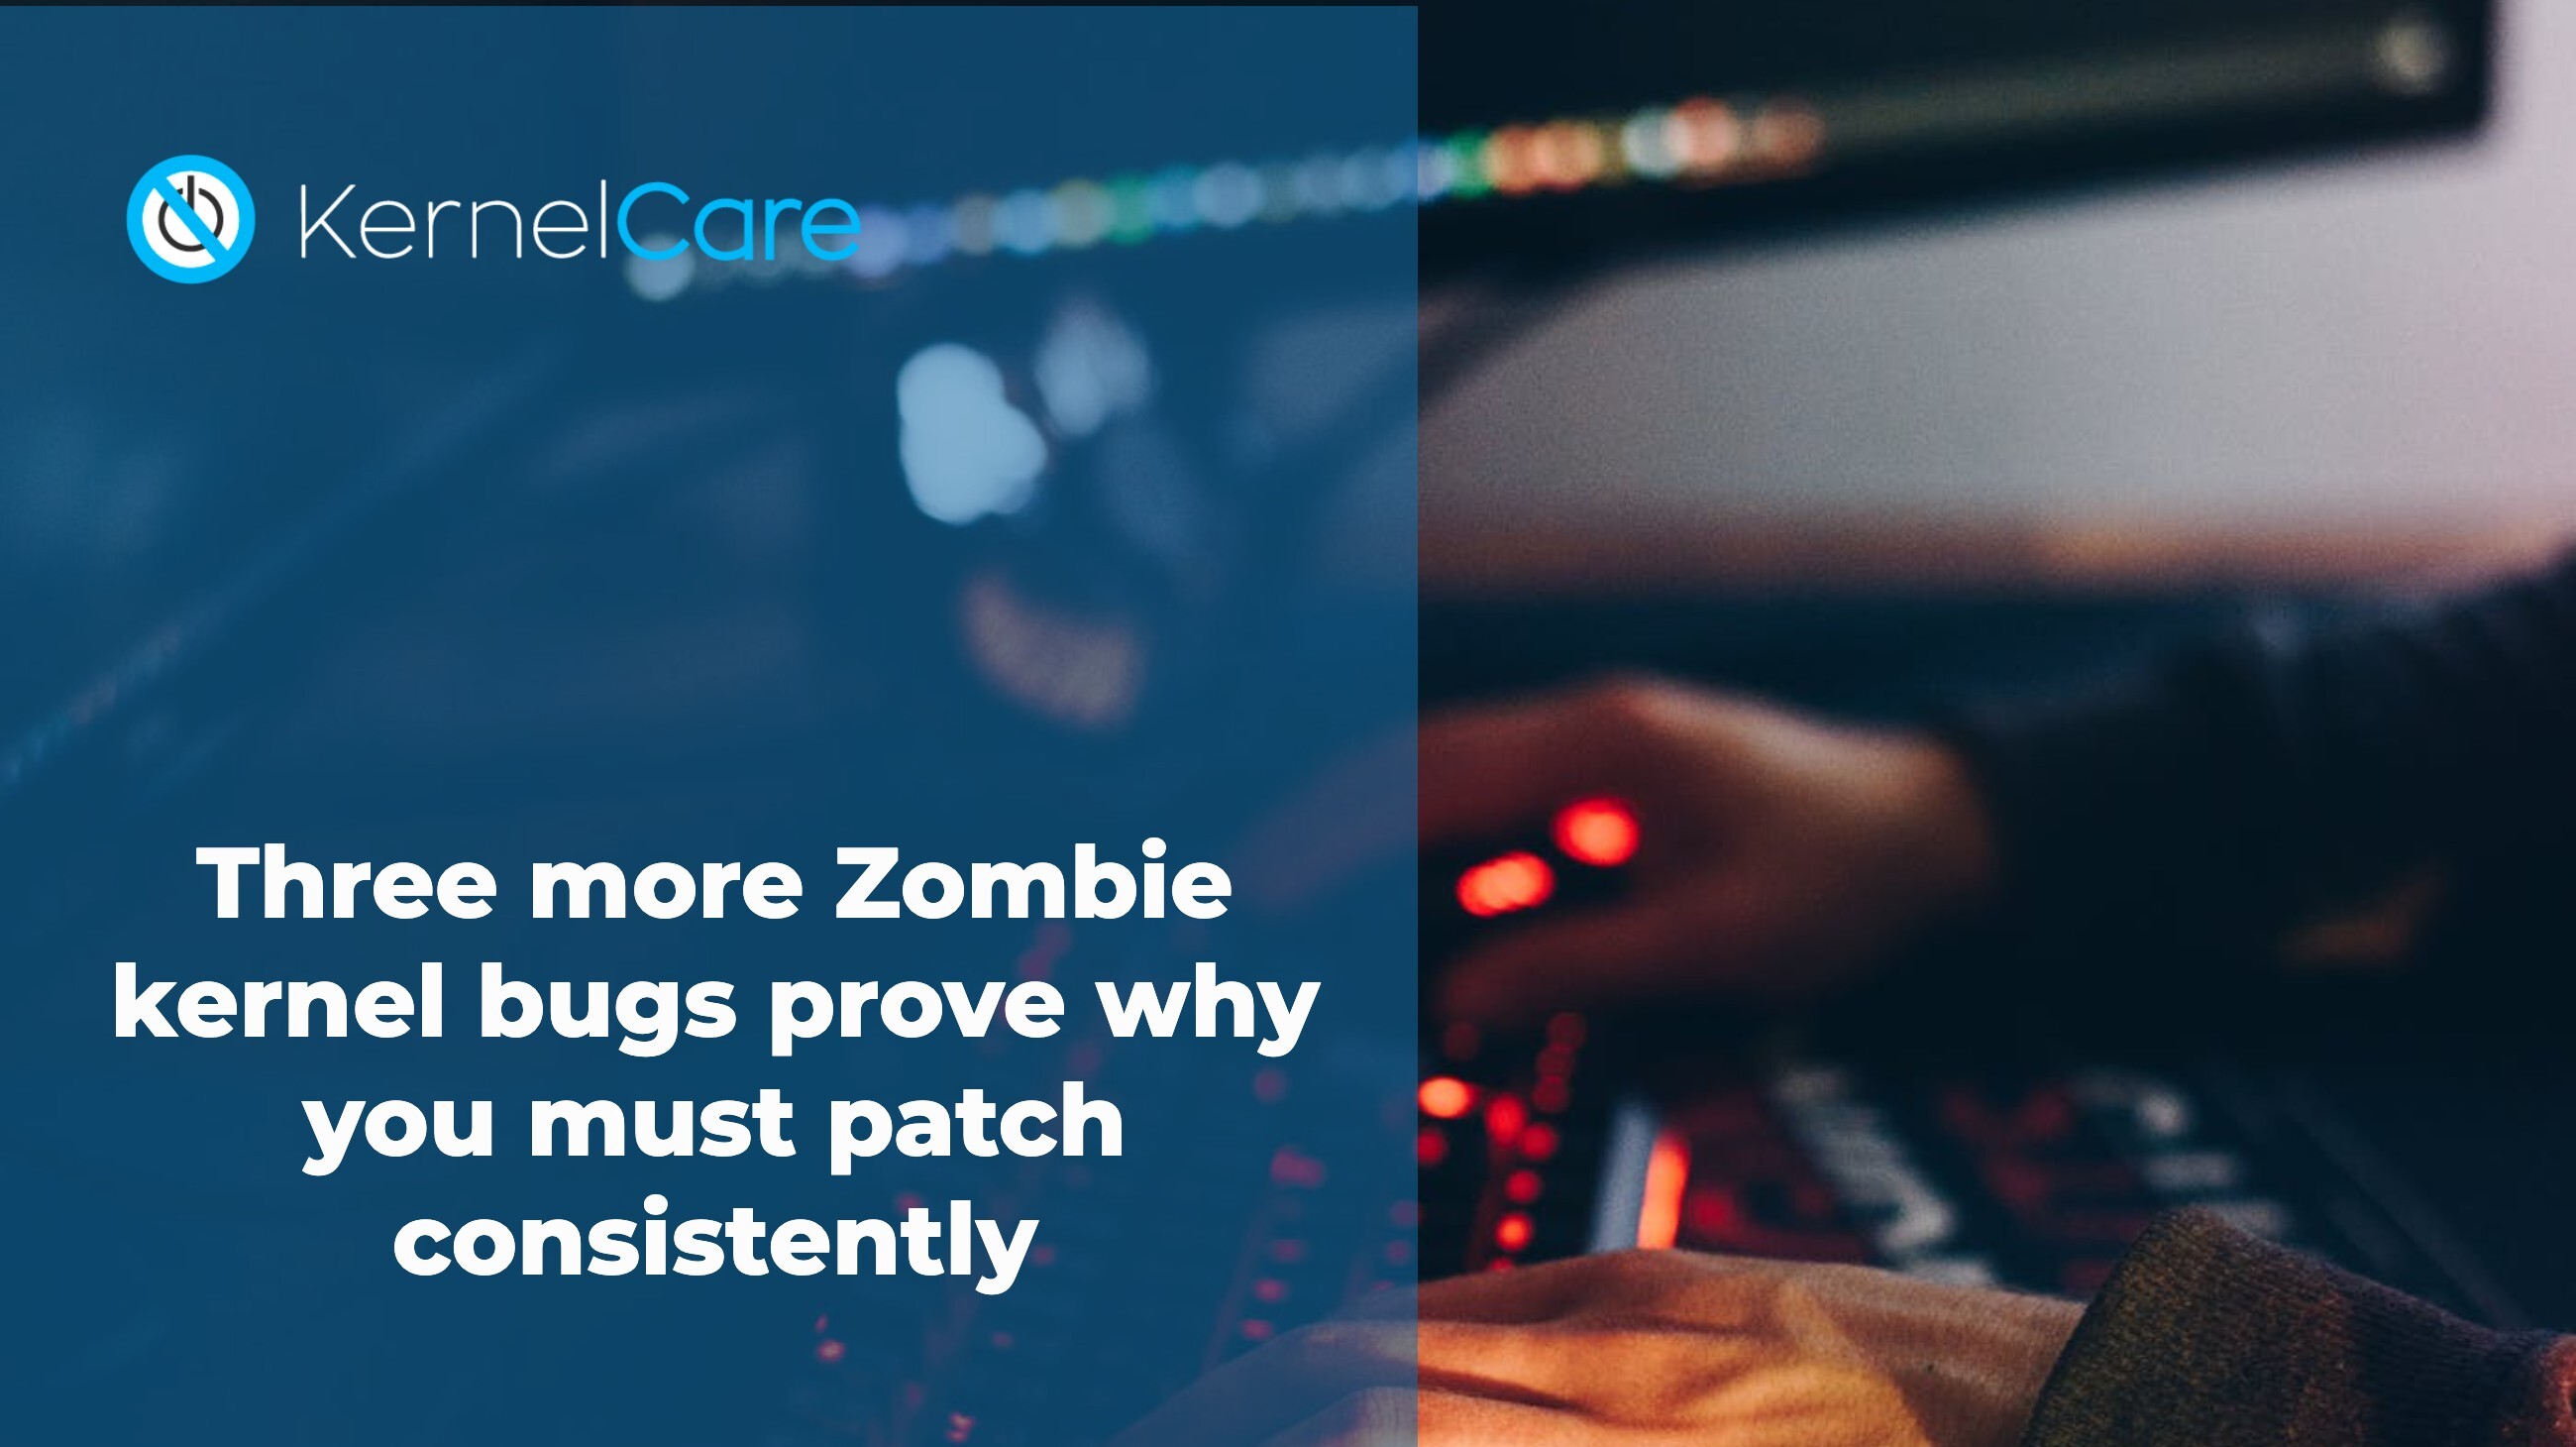 Three more Zombie kernel bugs prove why you must patch consistently